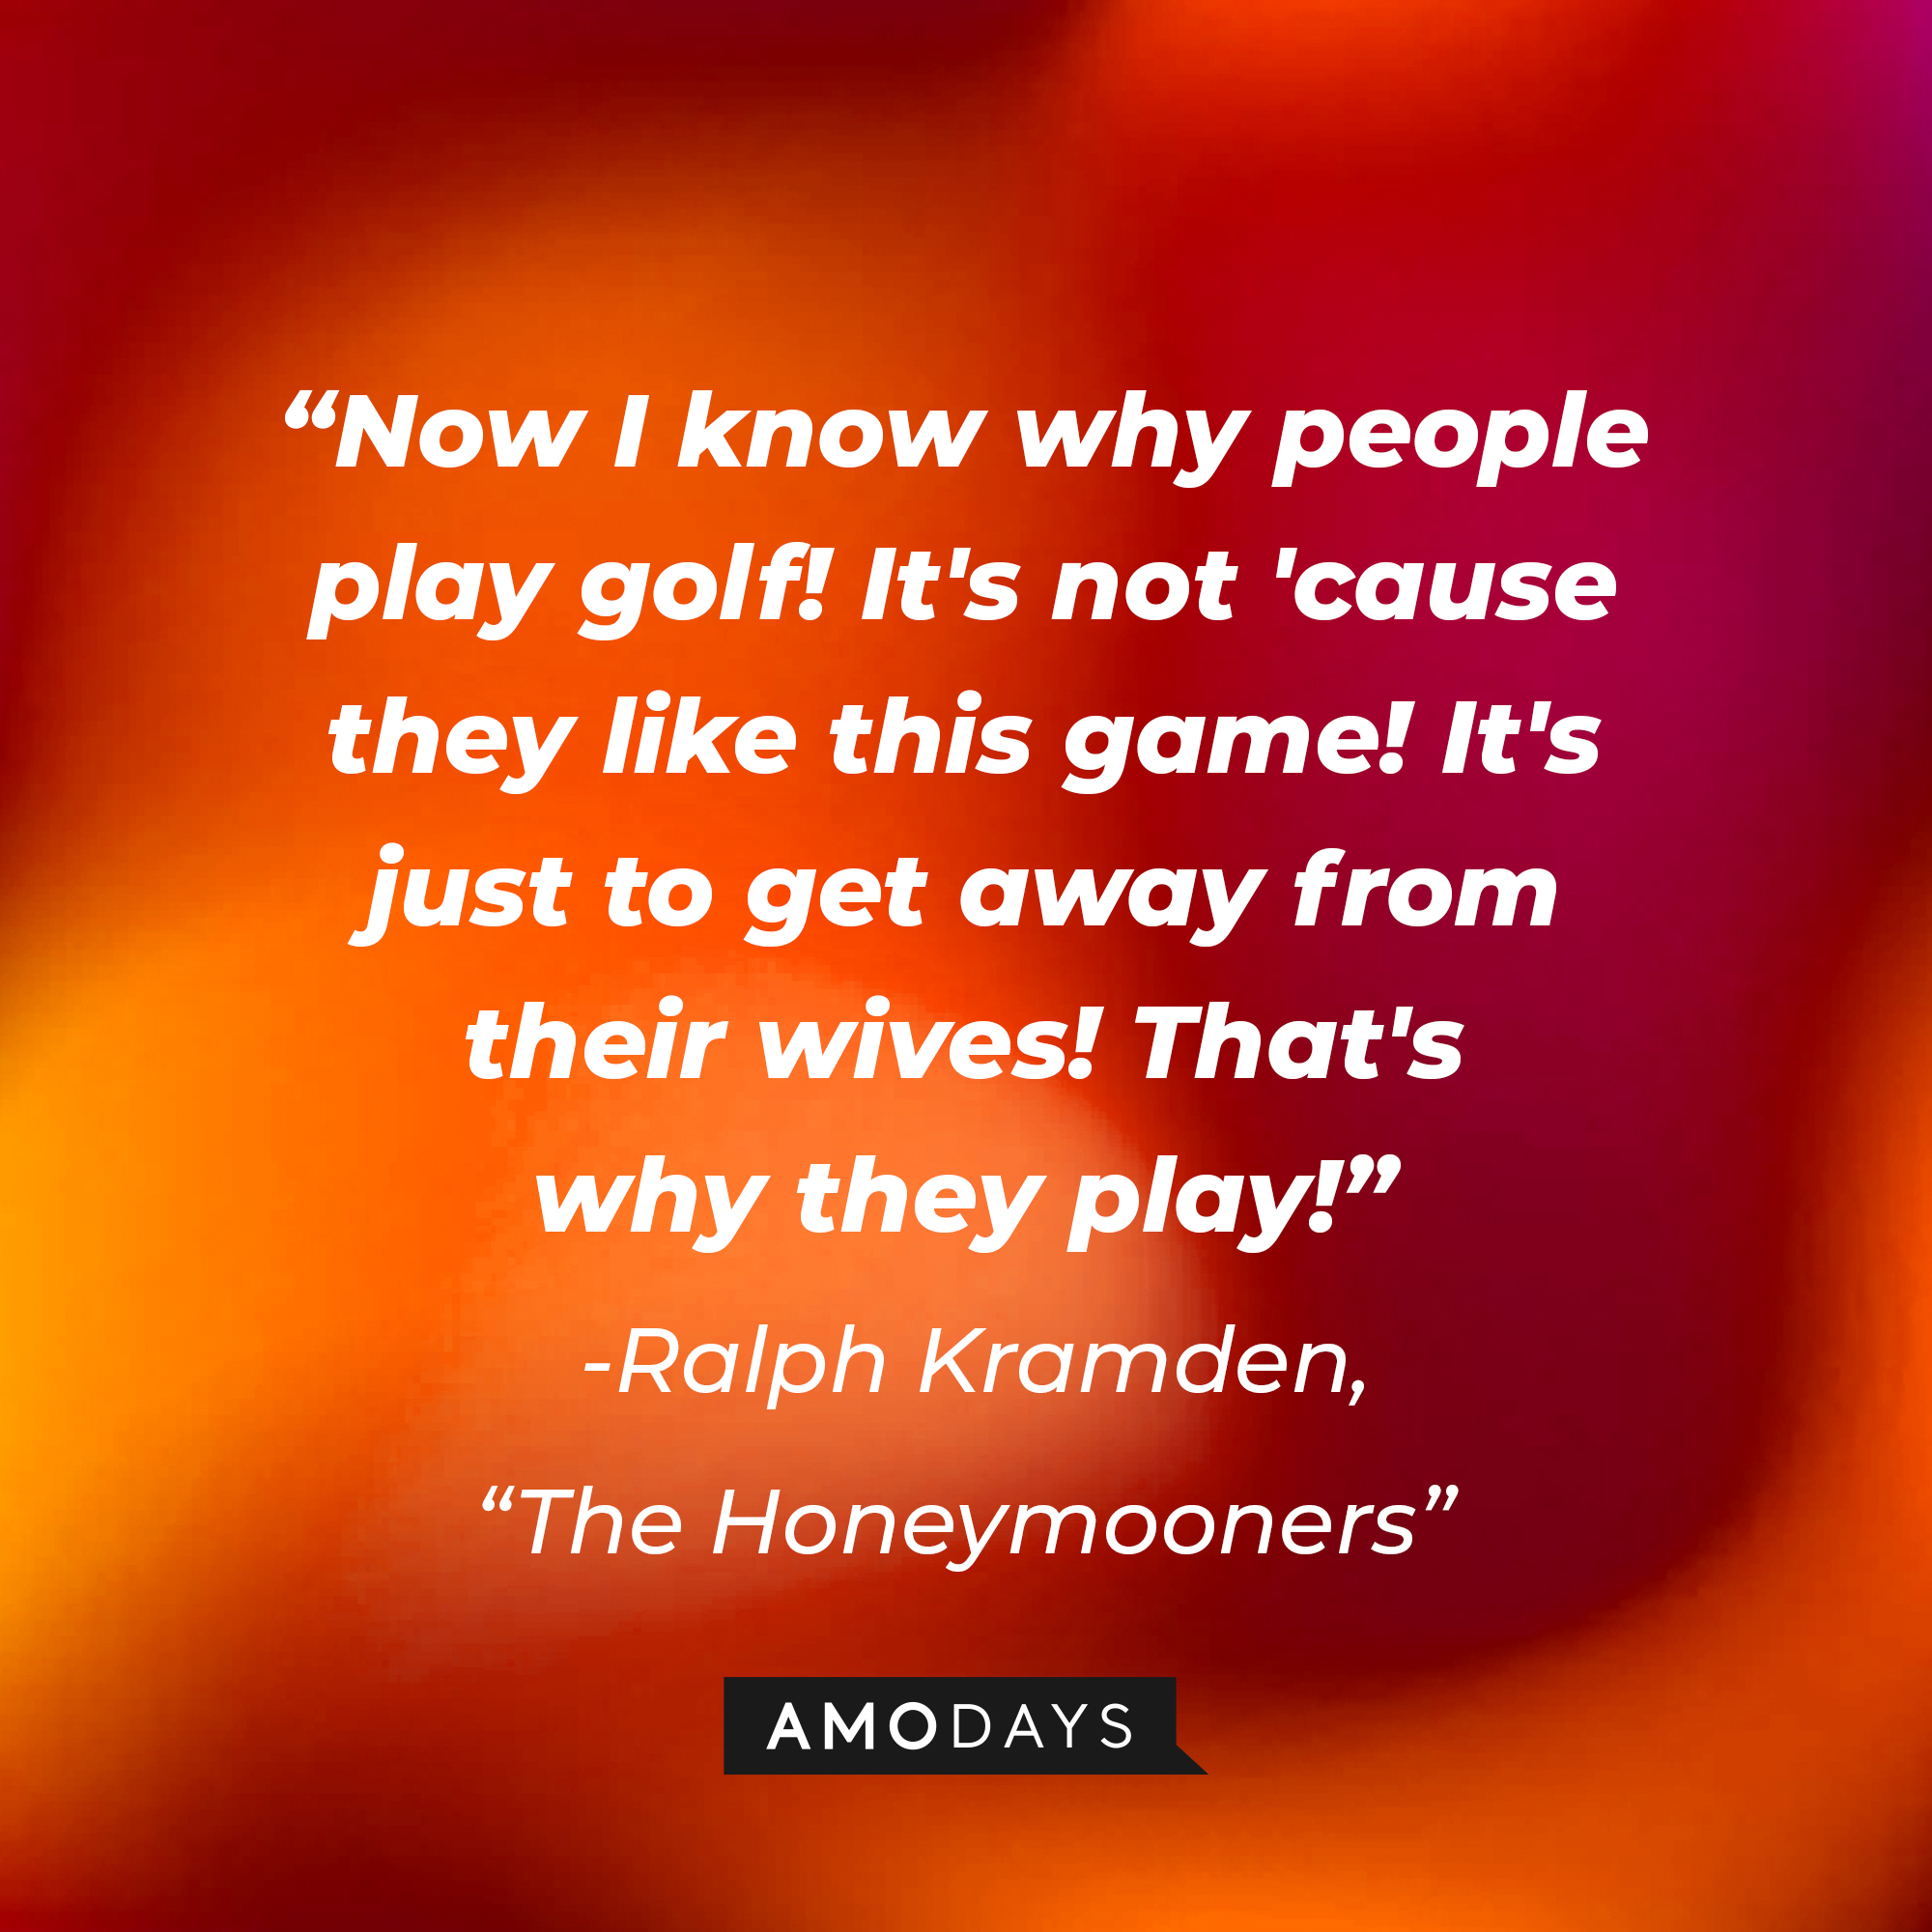 A quote from "The Honeymooners" star Ralph Kramden: "Now I know why people play golf! It's not 'cause they like this game! It's just to get away from their wives! That's why they play!" | Source: AmoDays